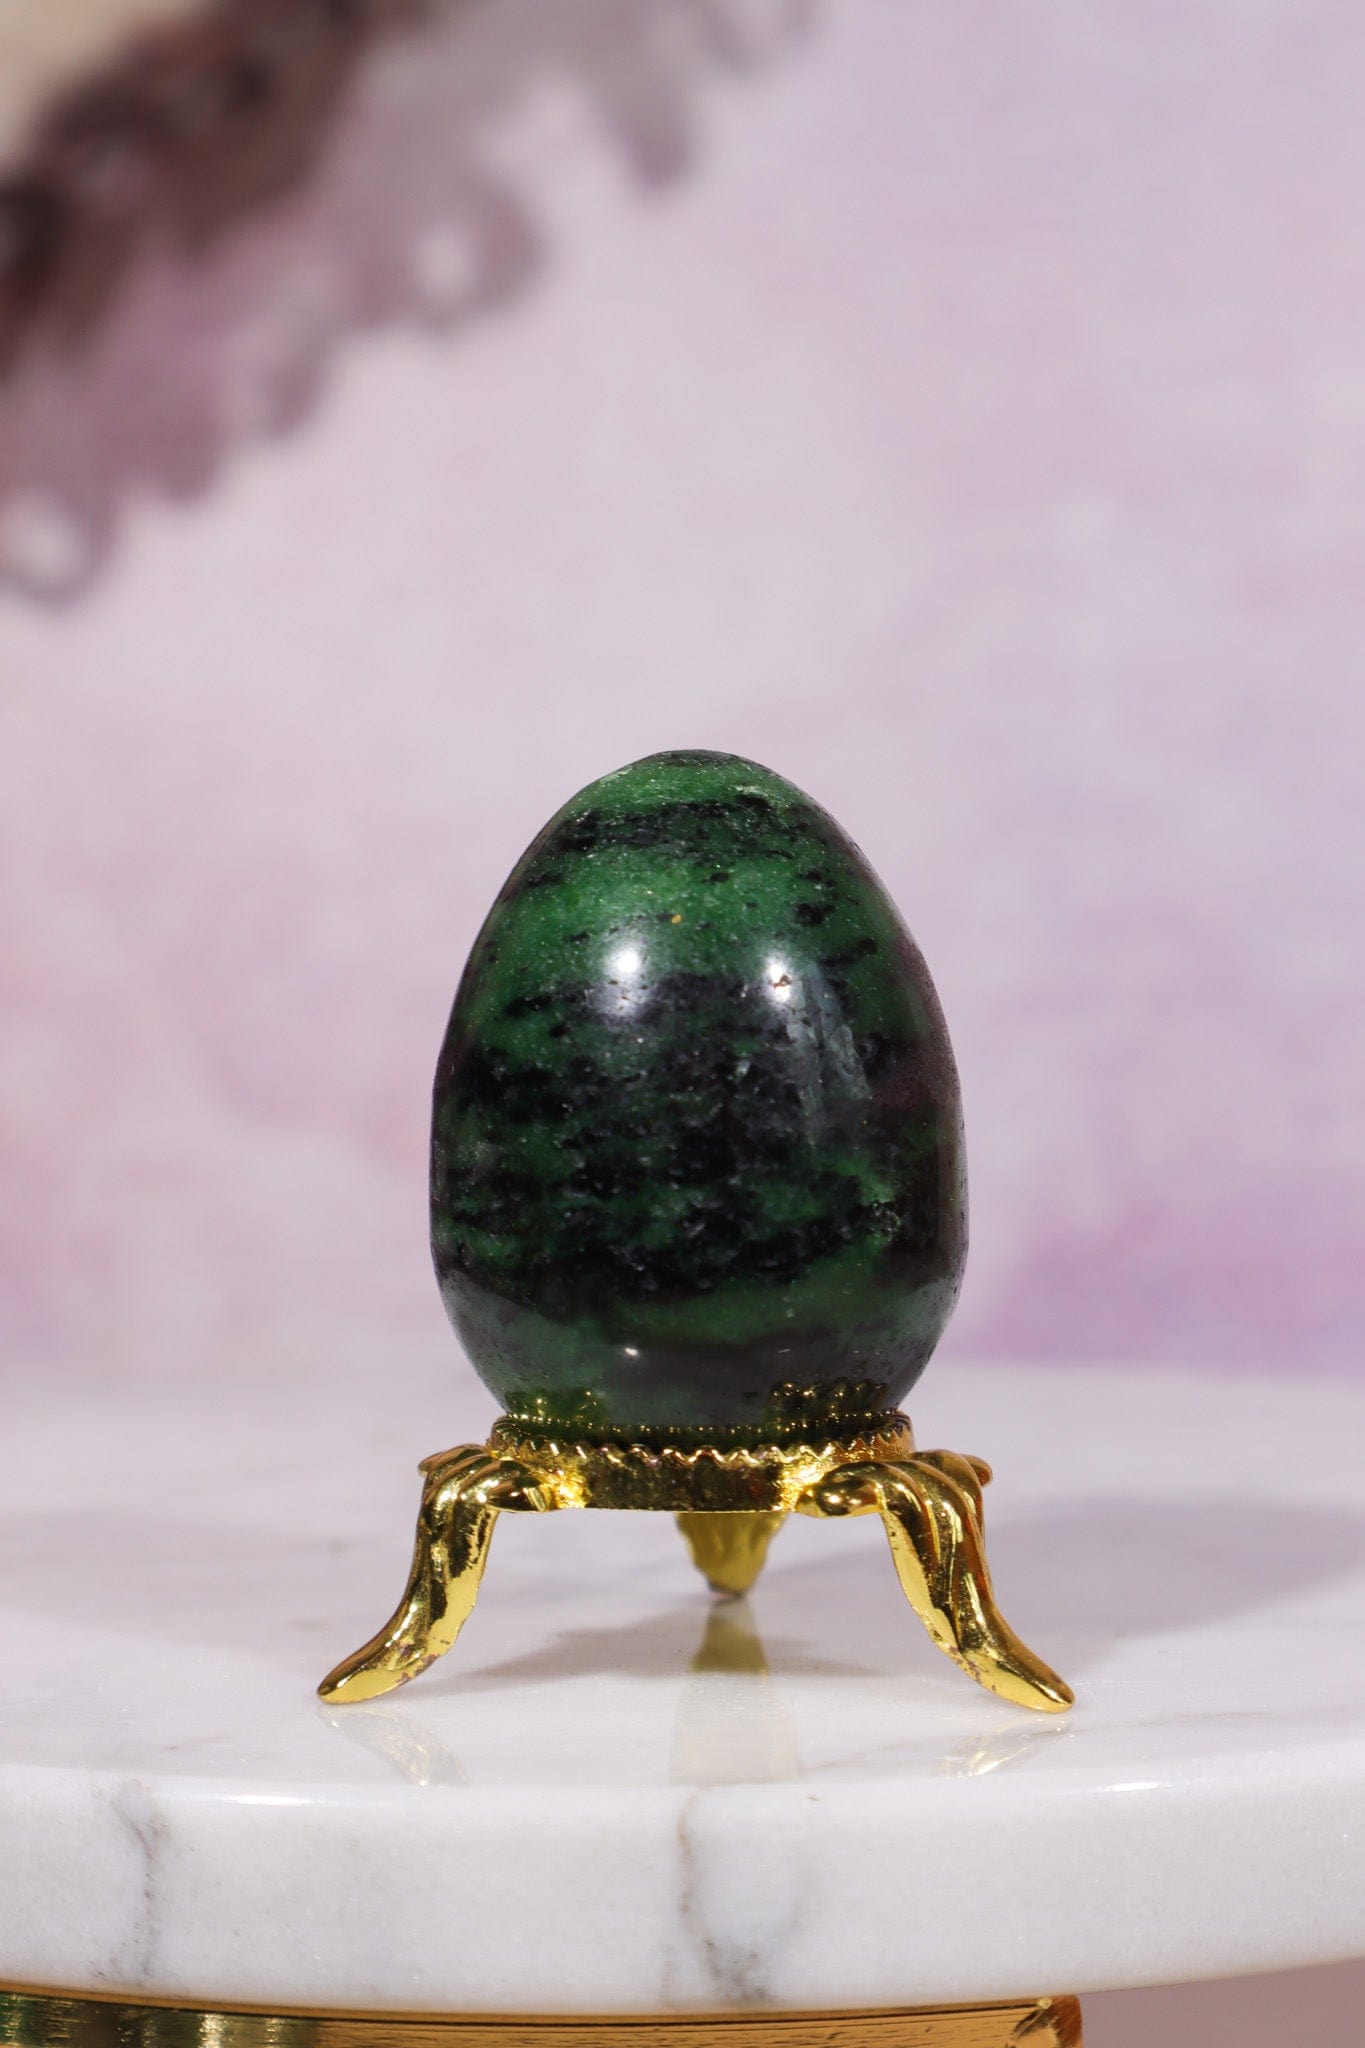 Ruby in Zoisite Egg 4cm Eggs Tali & Loz Crystals